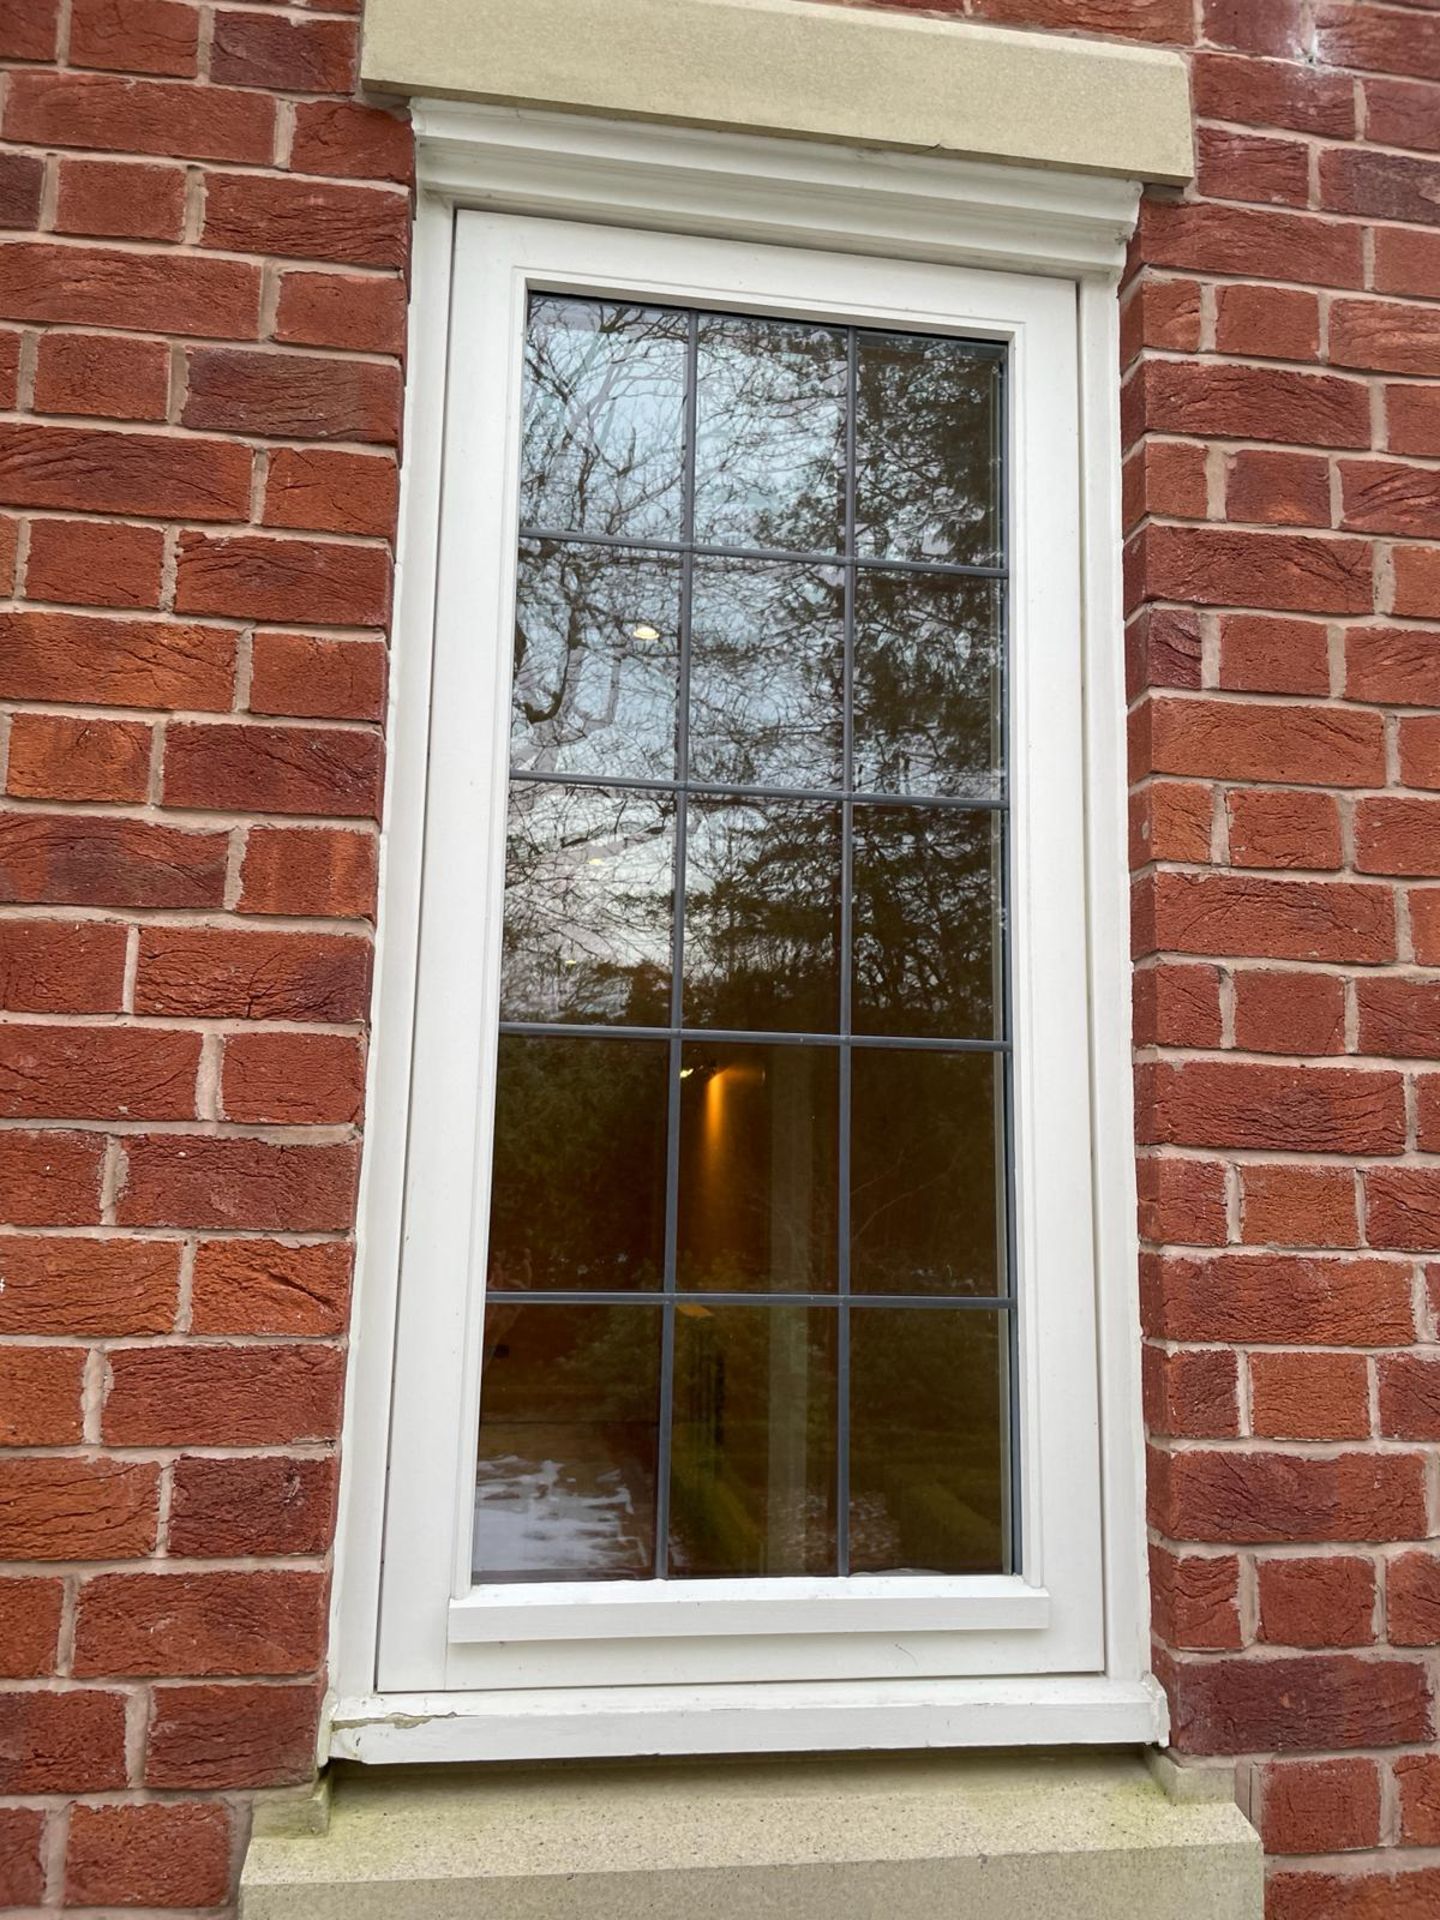 1 x Hardwood Timber Double Glazed & Leaded Window Frame - Ref: PAN147 / M-HALL - CL896 - NO VAT - Image 5 of 18